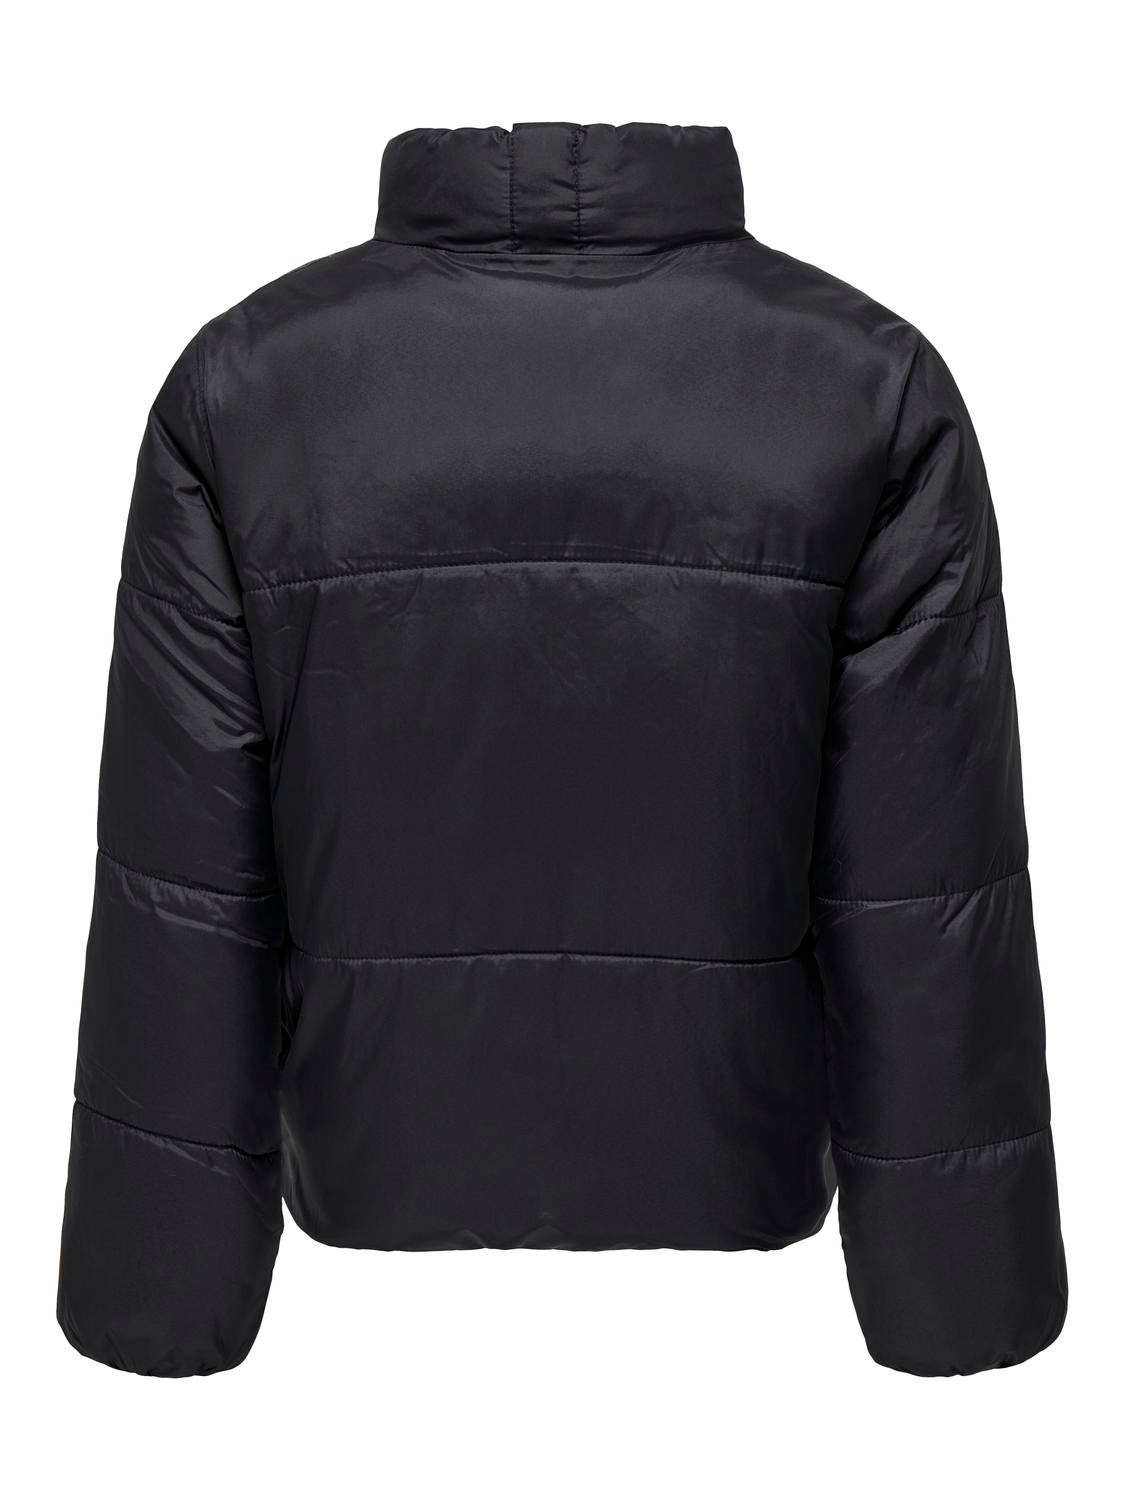 ONLY Jacket with high neck -Phantom - 15296063